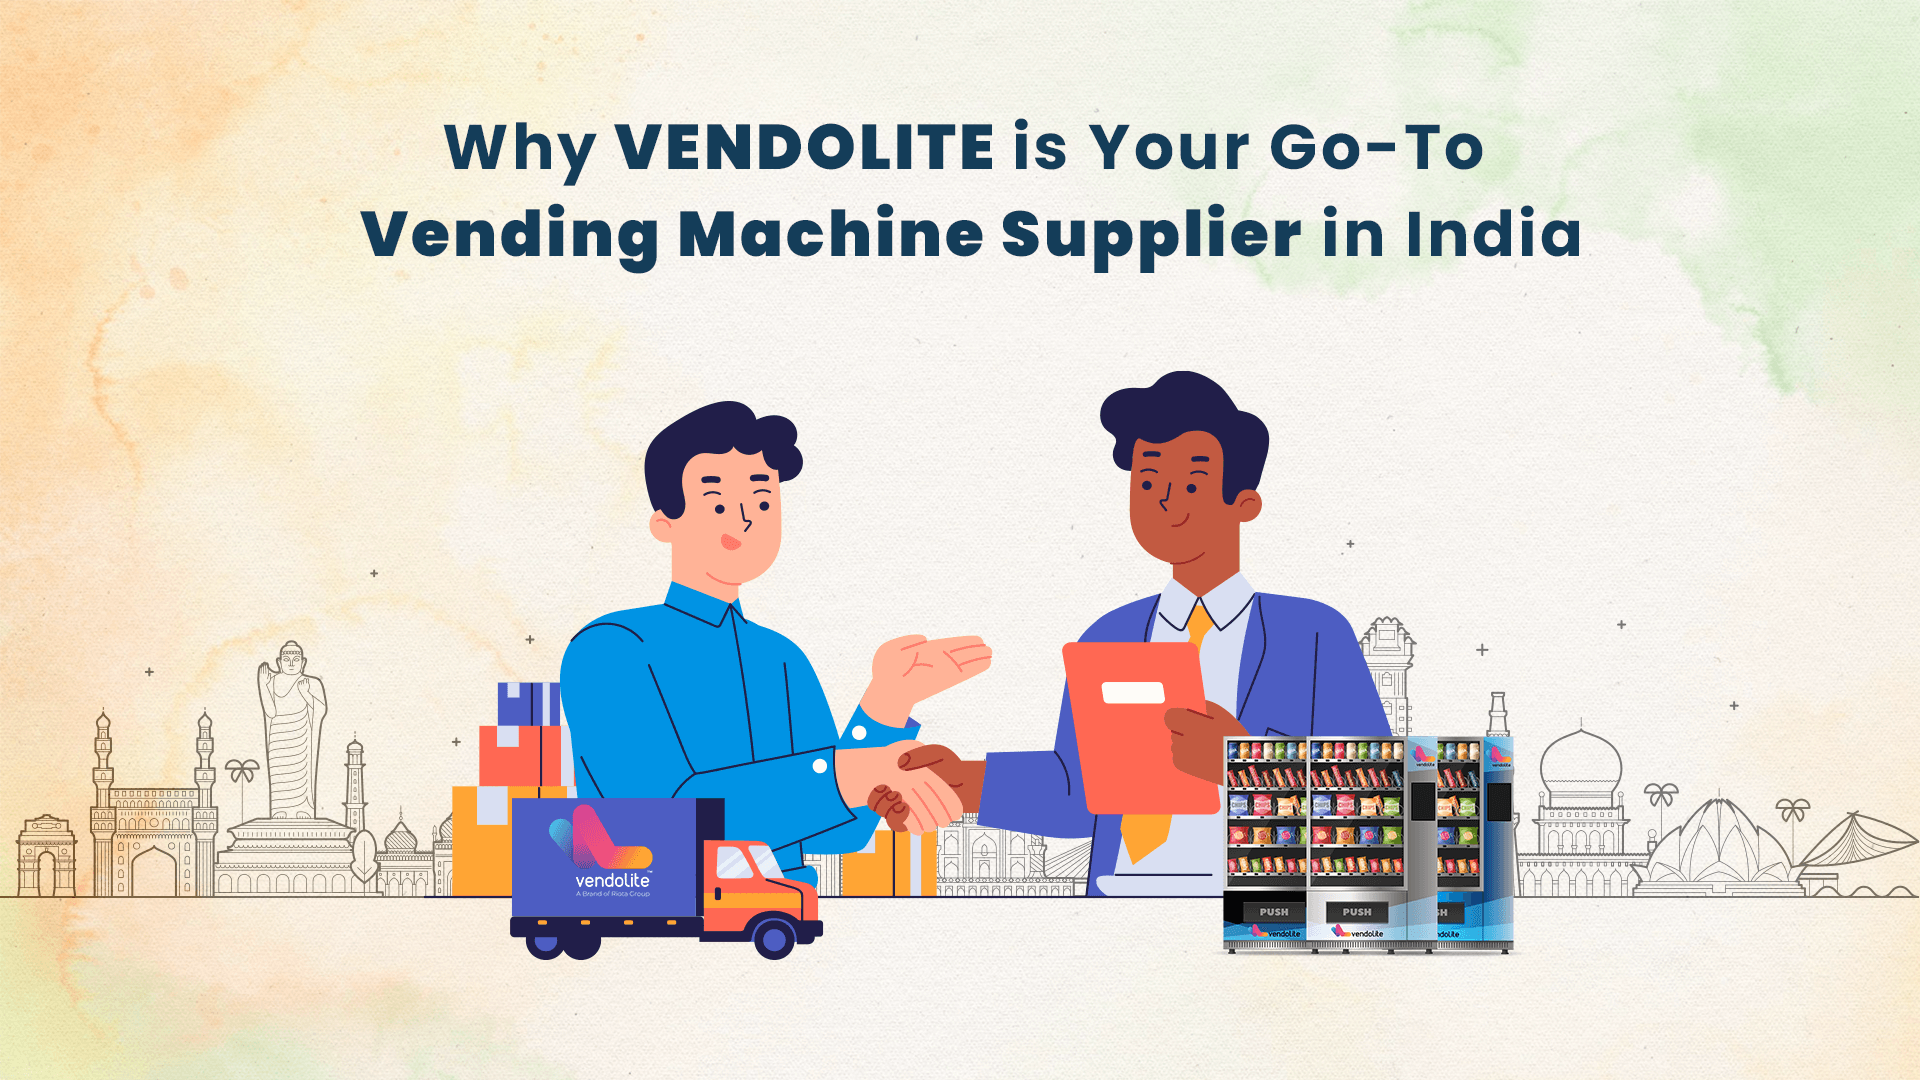 Why Vendolite is Your Go-To Vending Machine Supplier in India